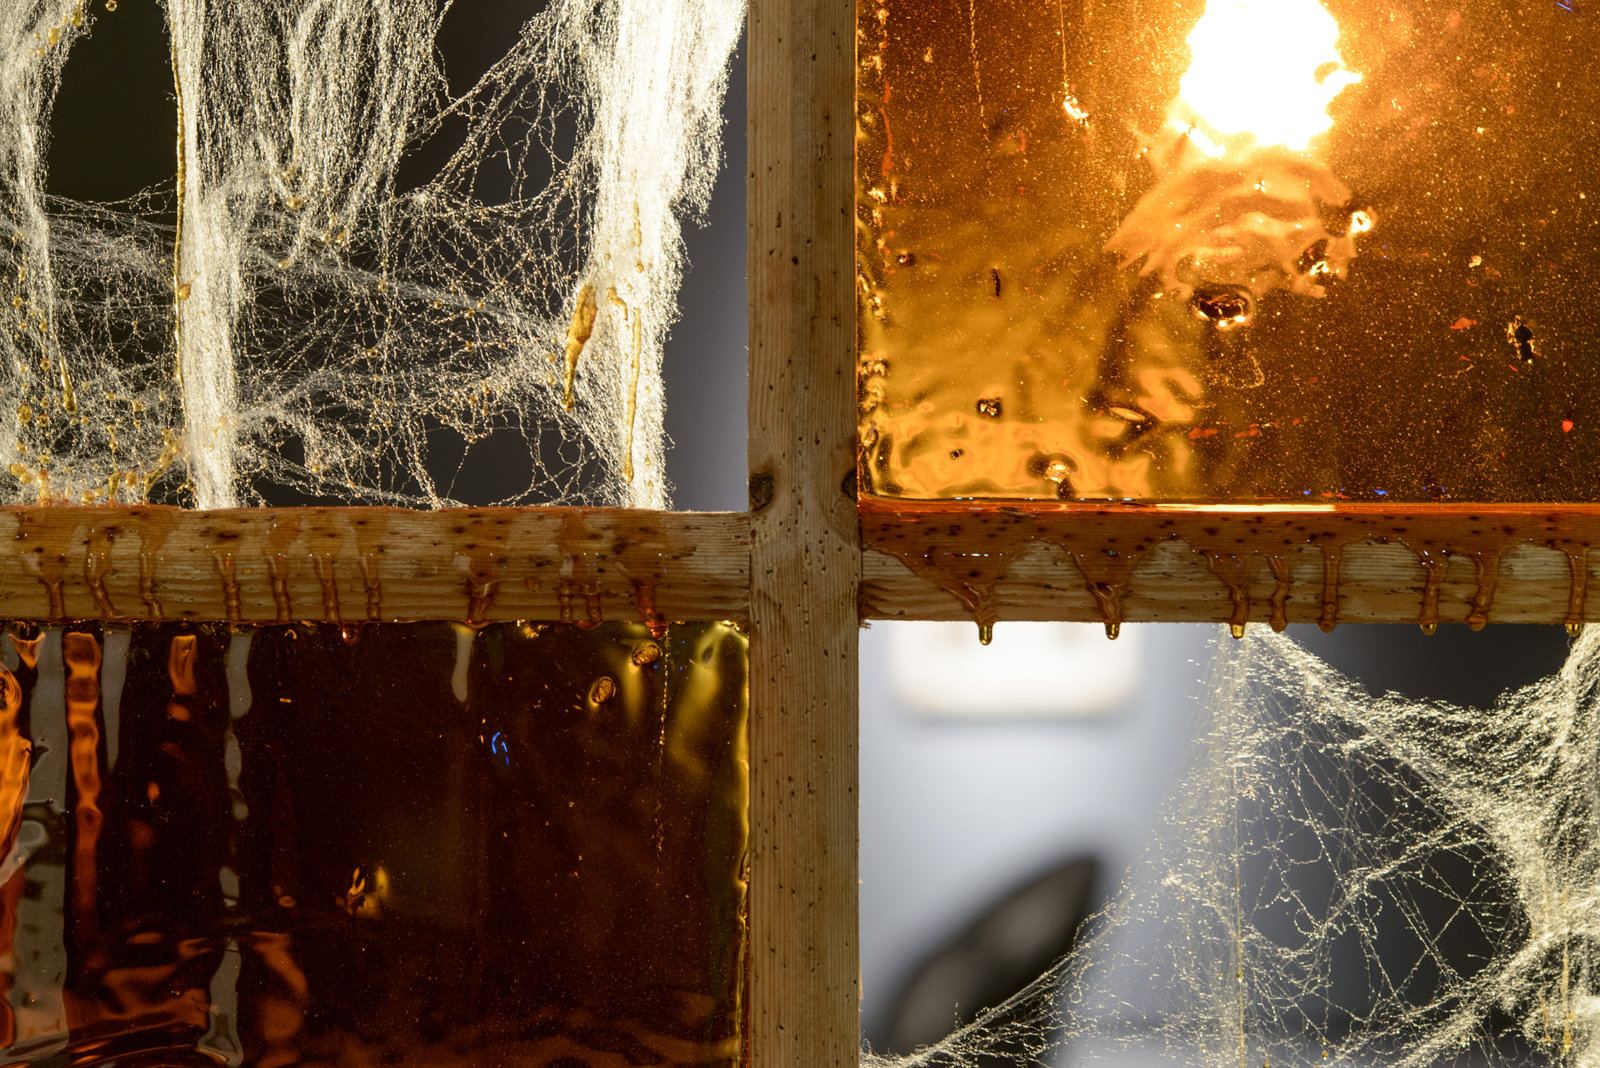 Kasper Feyrer, Bugged/Webbed, 2013, sugar glass with dead bugs, fake cobwebs, bleached hole riddled wood frame, dimensions variable. Installation view, The Intellection of Lady Spider House, Art Gallery of Alberta, 2013.